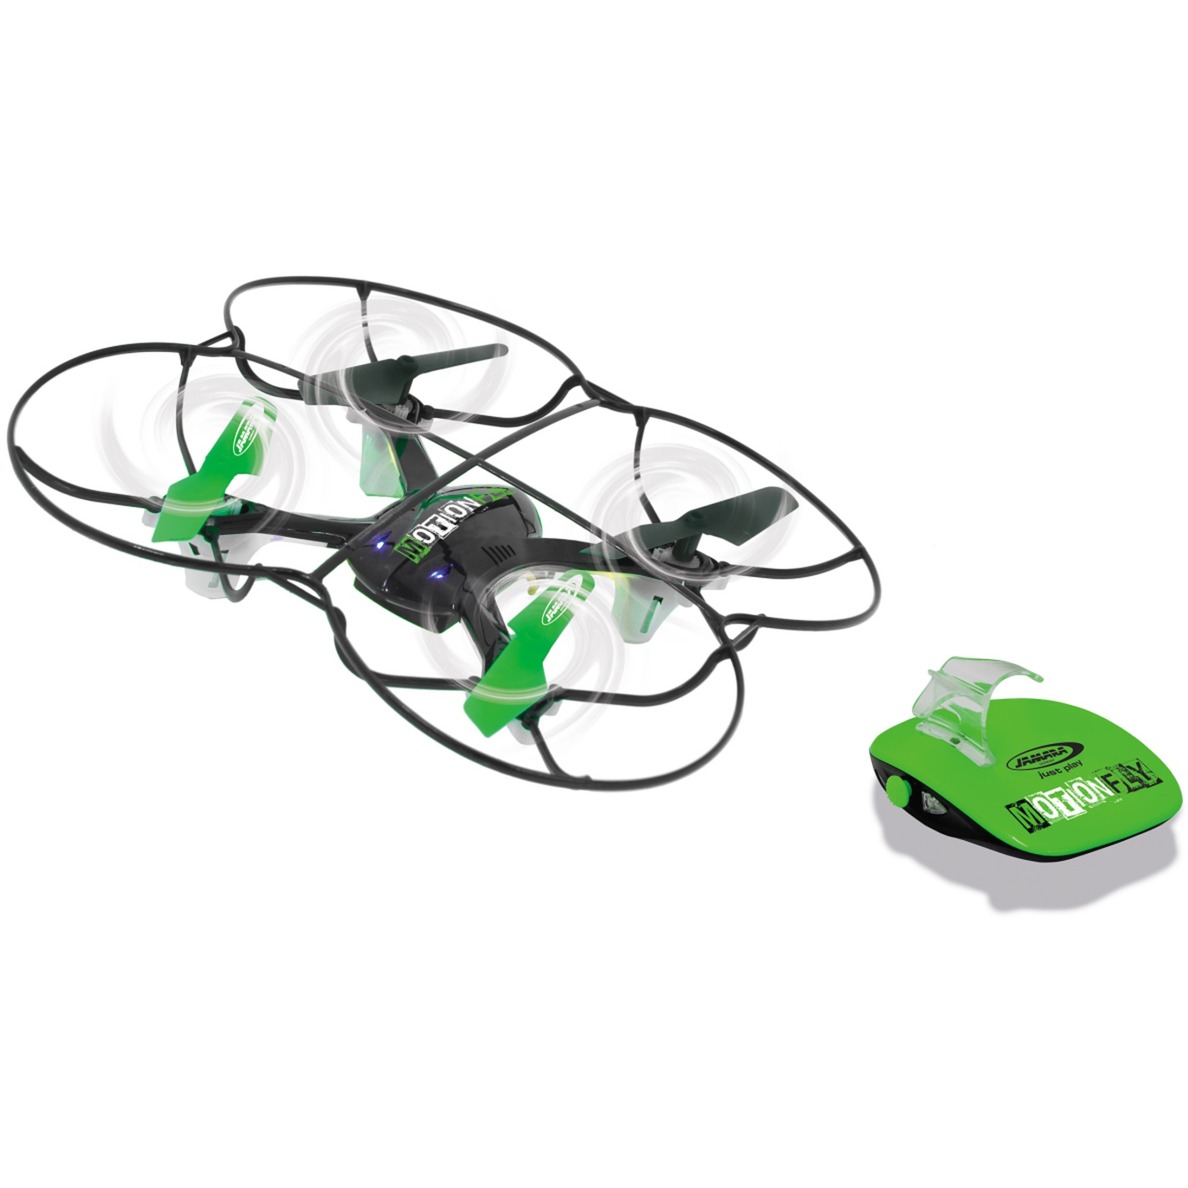 MotionFly Drone